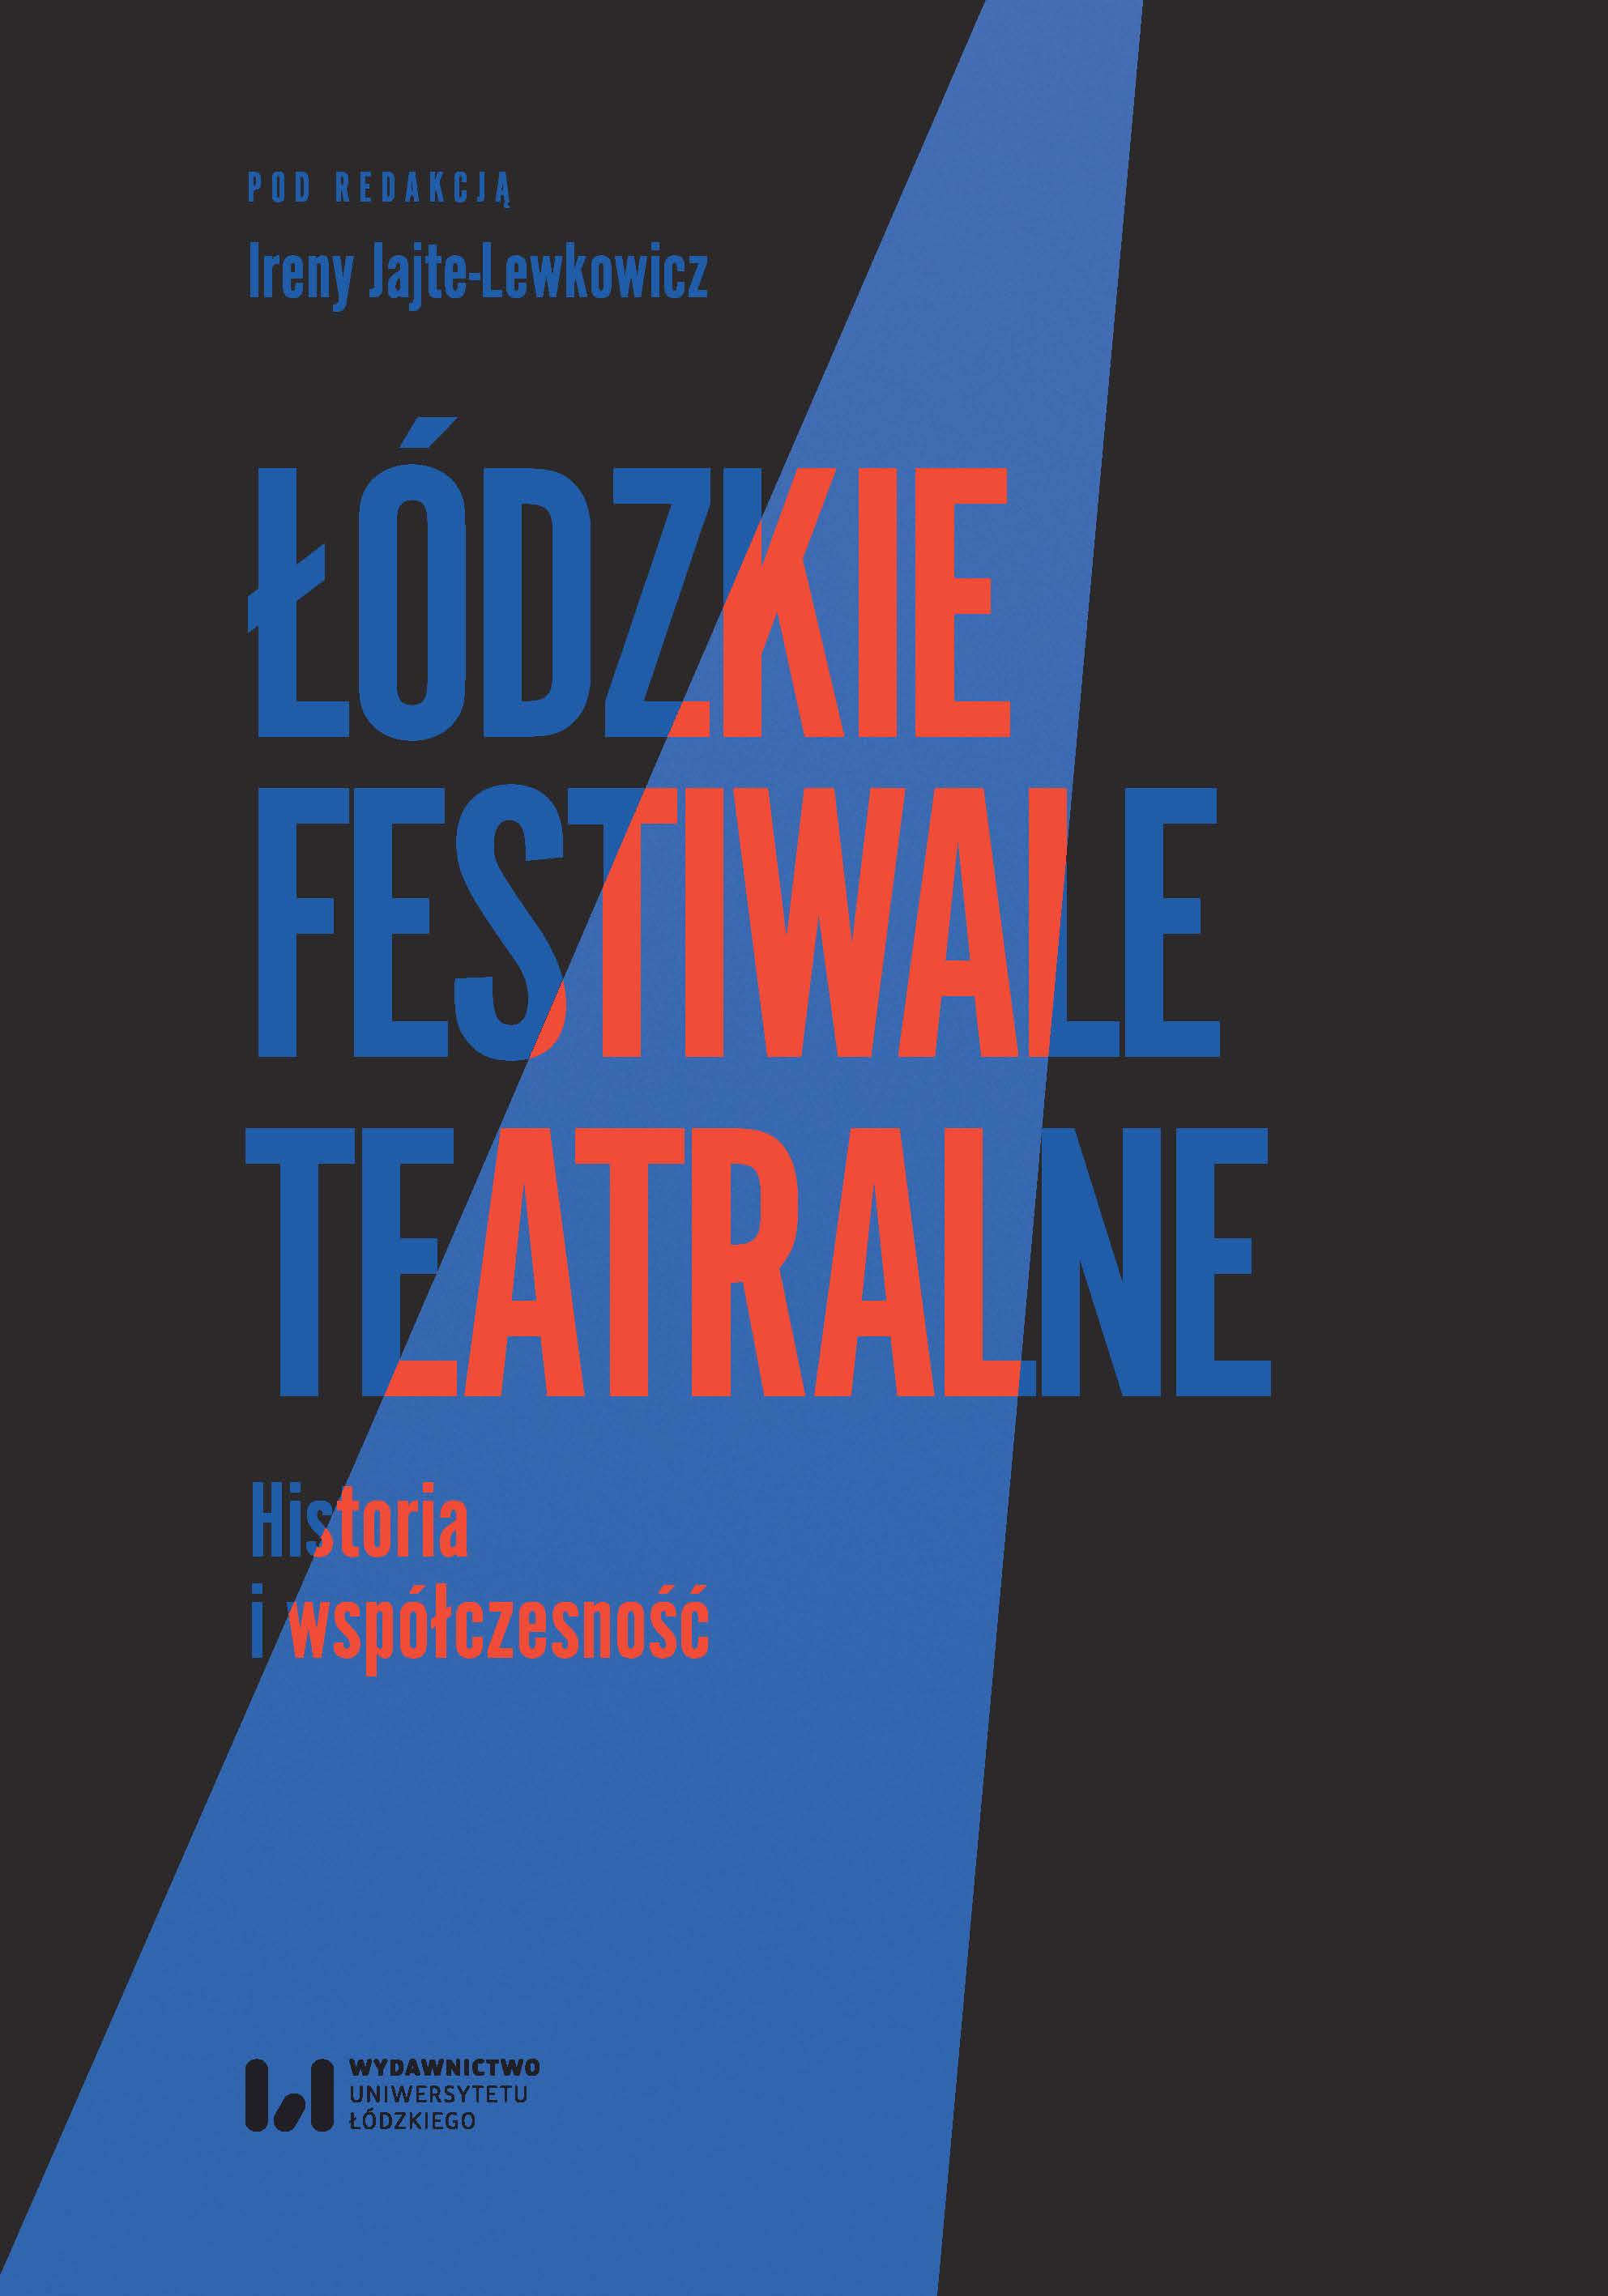 “Big People Have Very Big Shoes” – a sketch about Lodz theater festivals for children and teenagers Cover Image